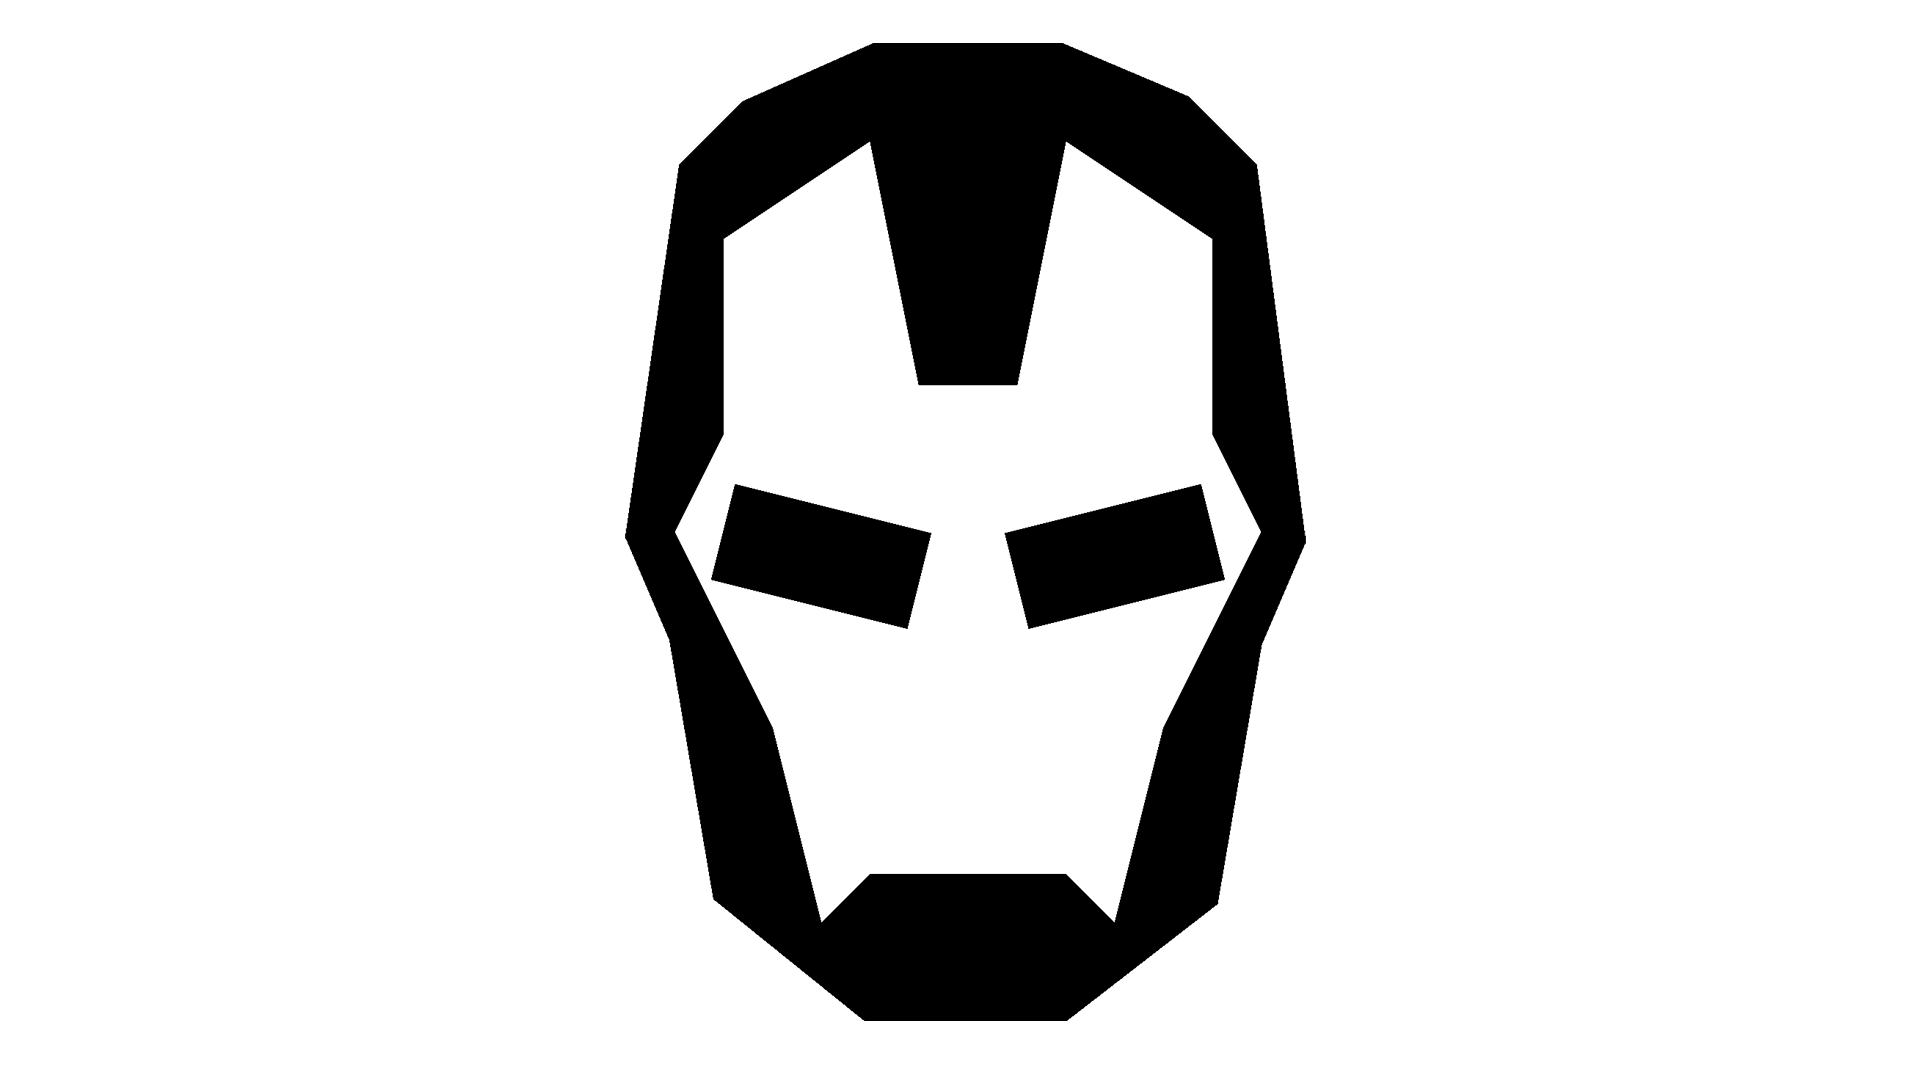 Iron Man Logo - Iron Man Logo, Iron Man Symbol, Meaning, History and Evolution